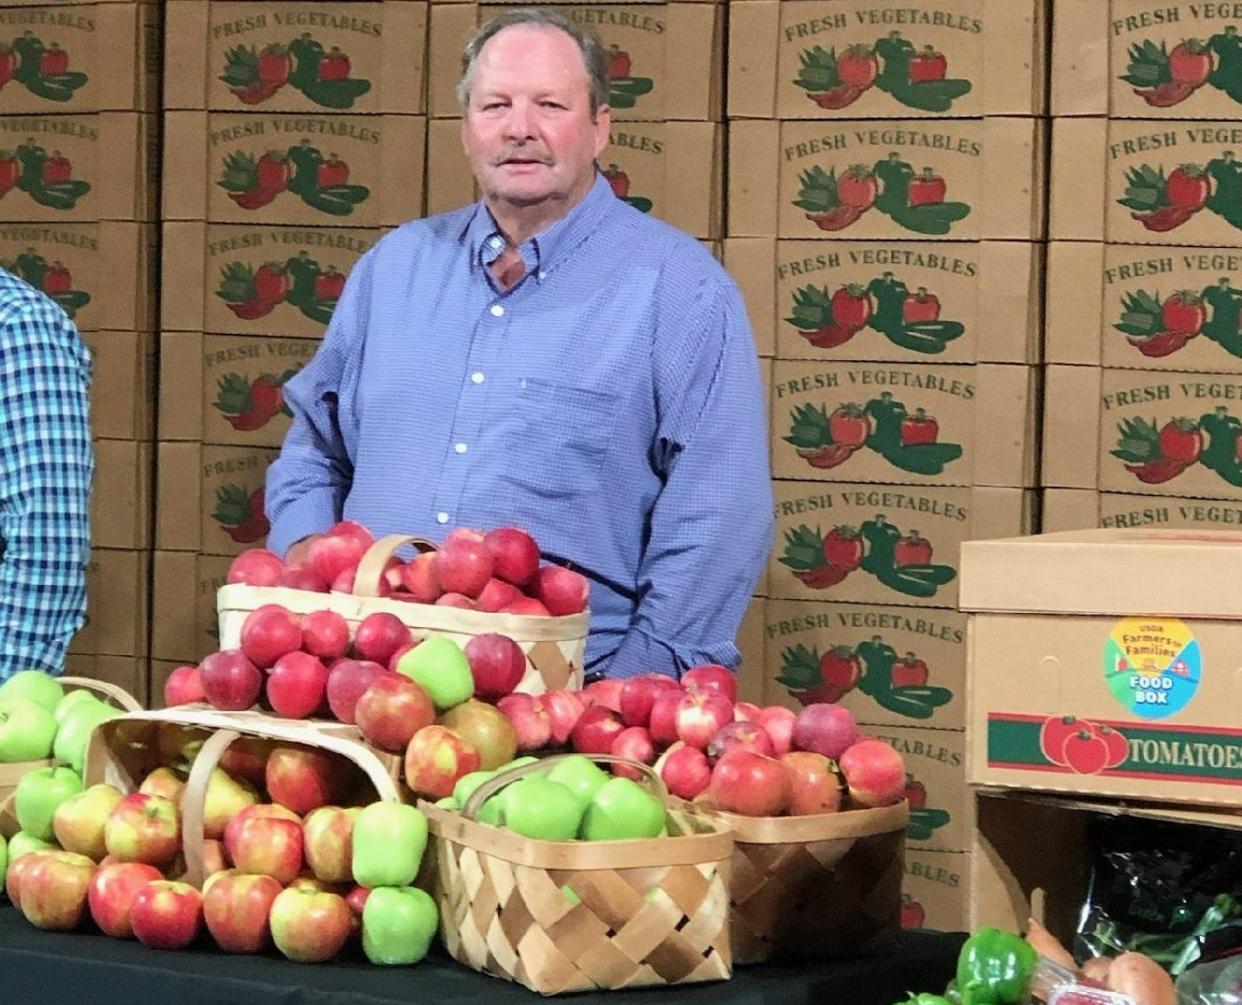 Ednevyille's Kenny Barnwell is the American Fruit Grower Magazine's East Region Apple Grower of the Year.